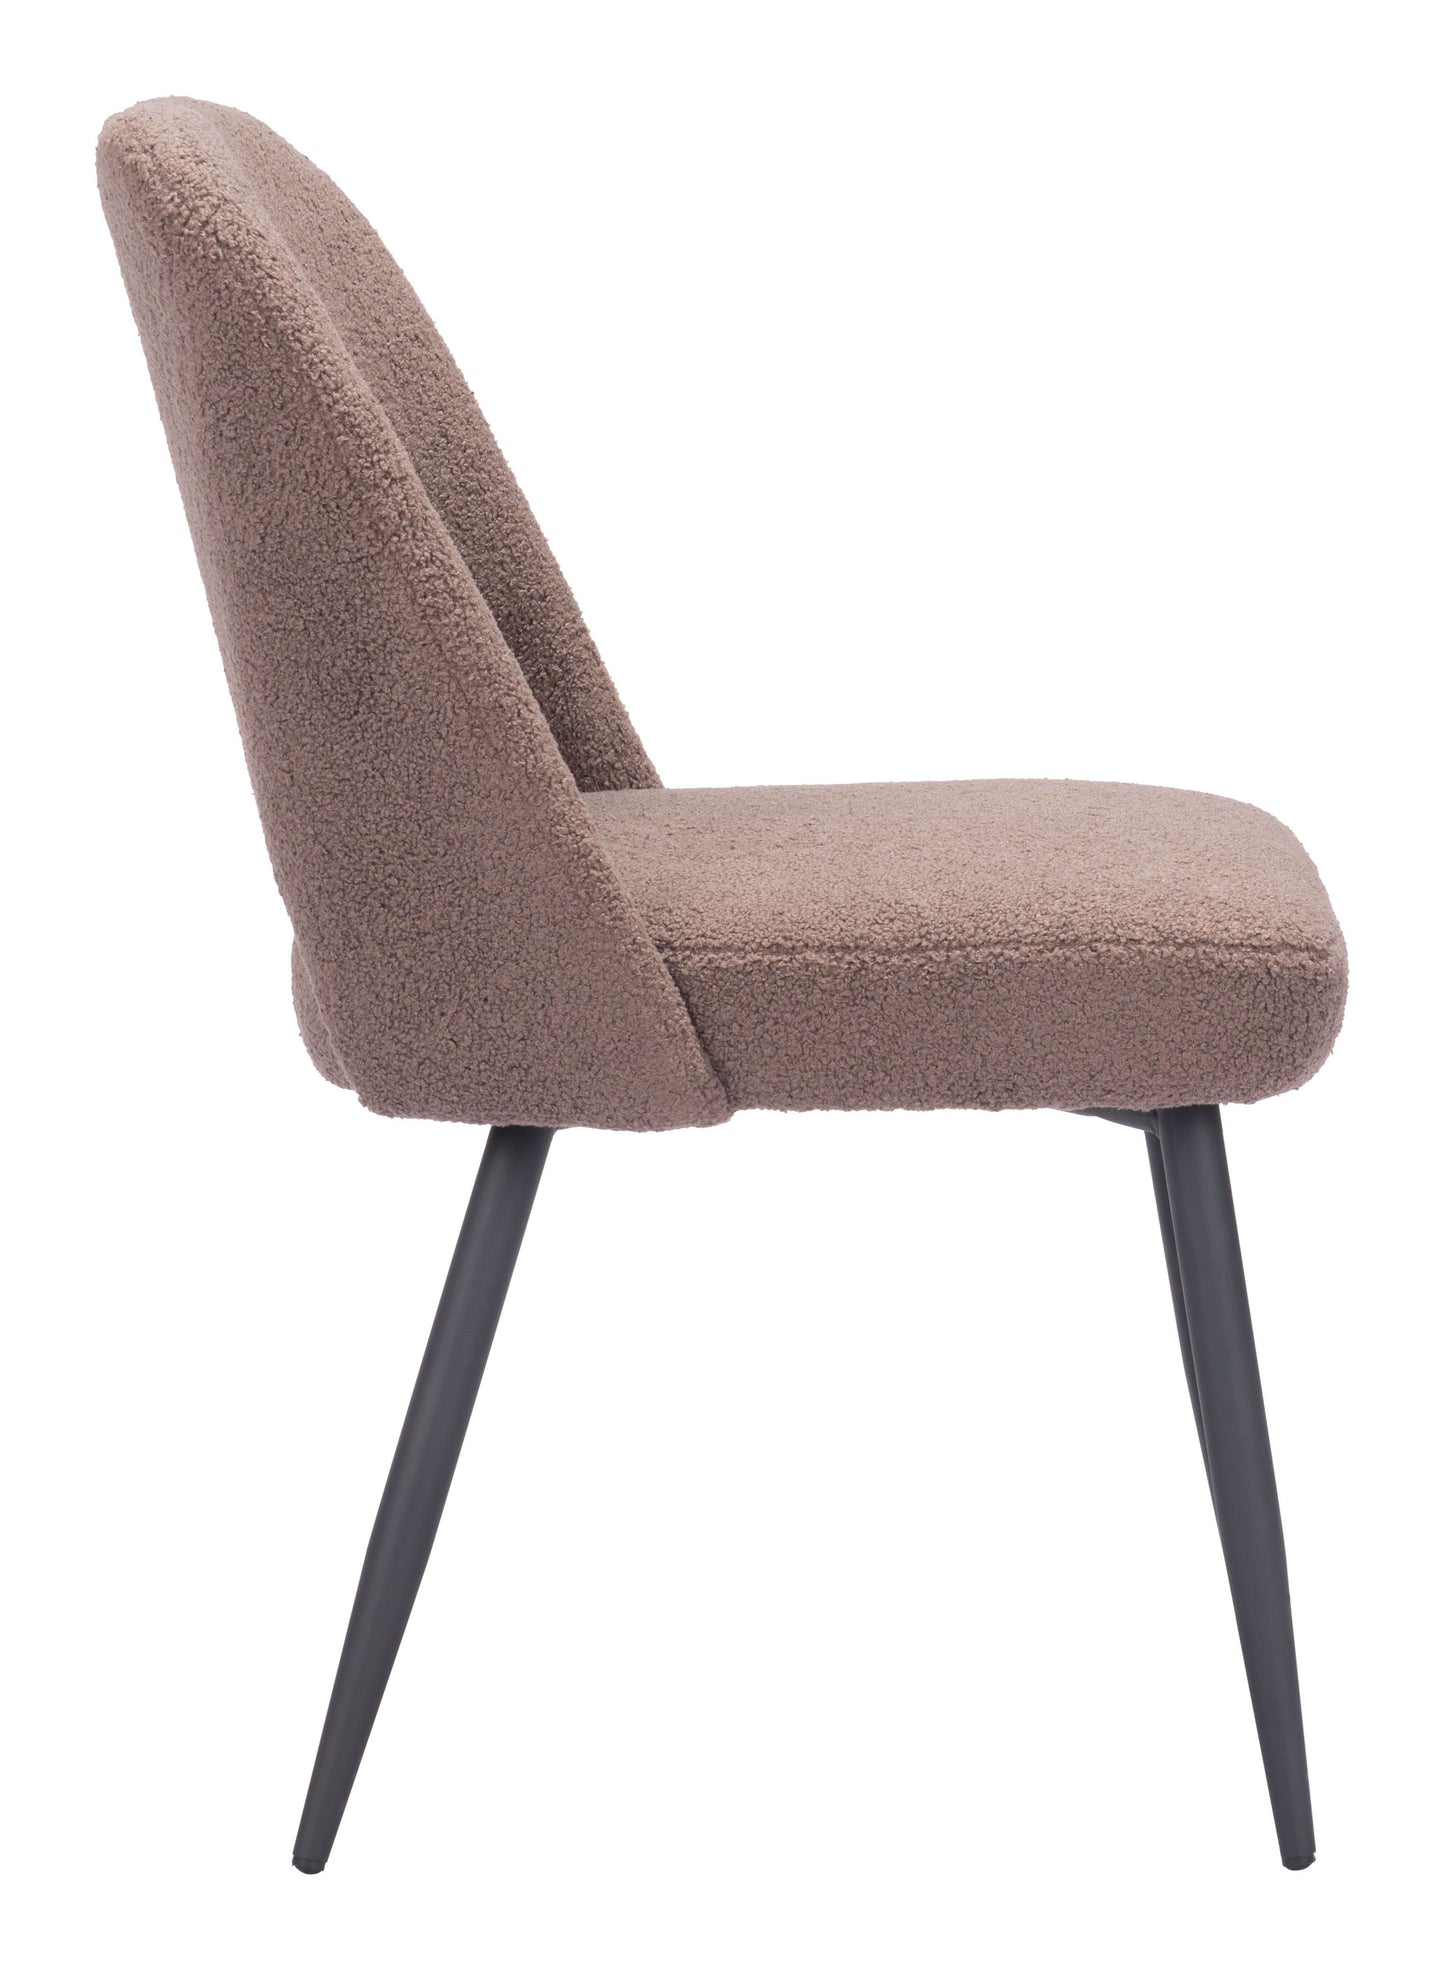 Teddy Dining Chair Brown